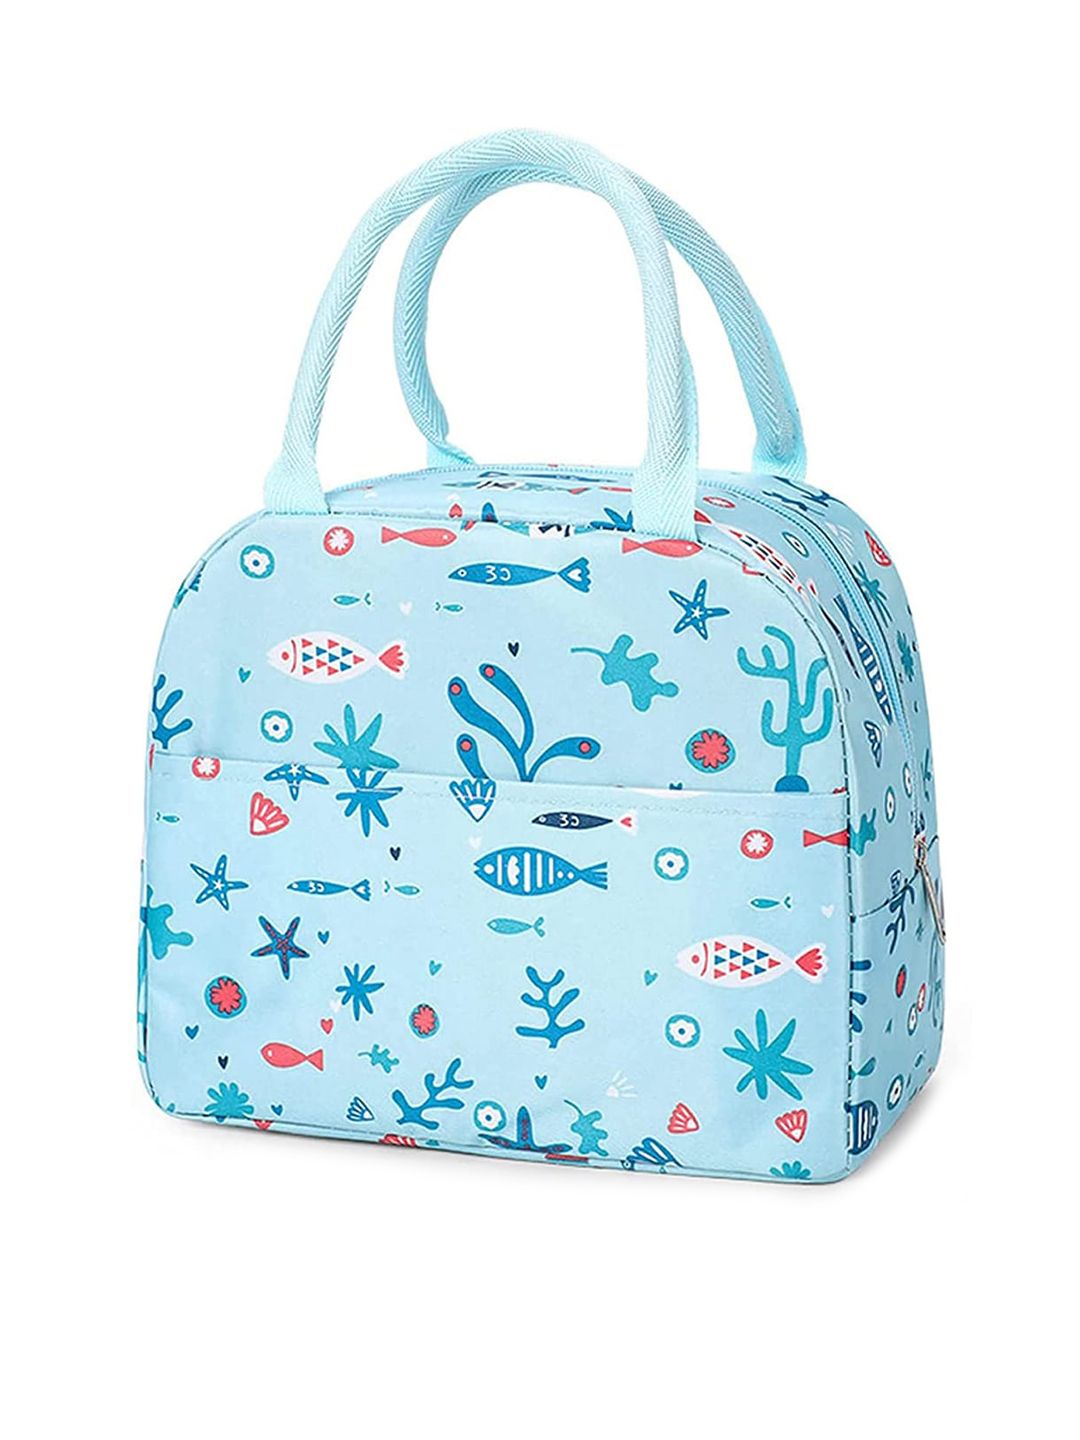 HOUSE OF QUIRK Blue Aquatic Print Insulated Lunch Bag Price in India